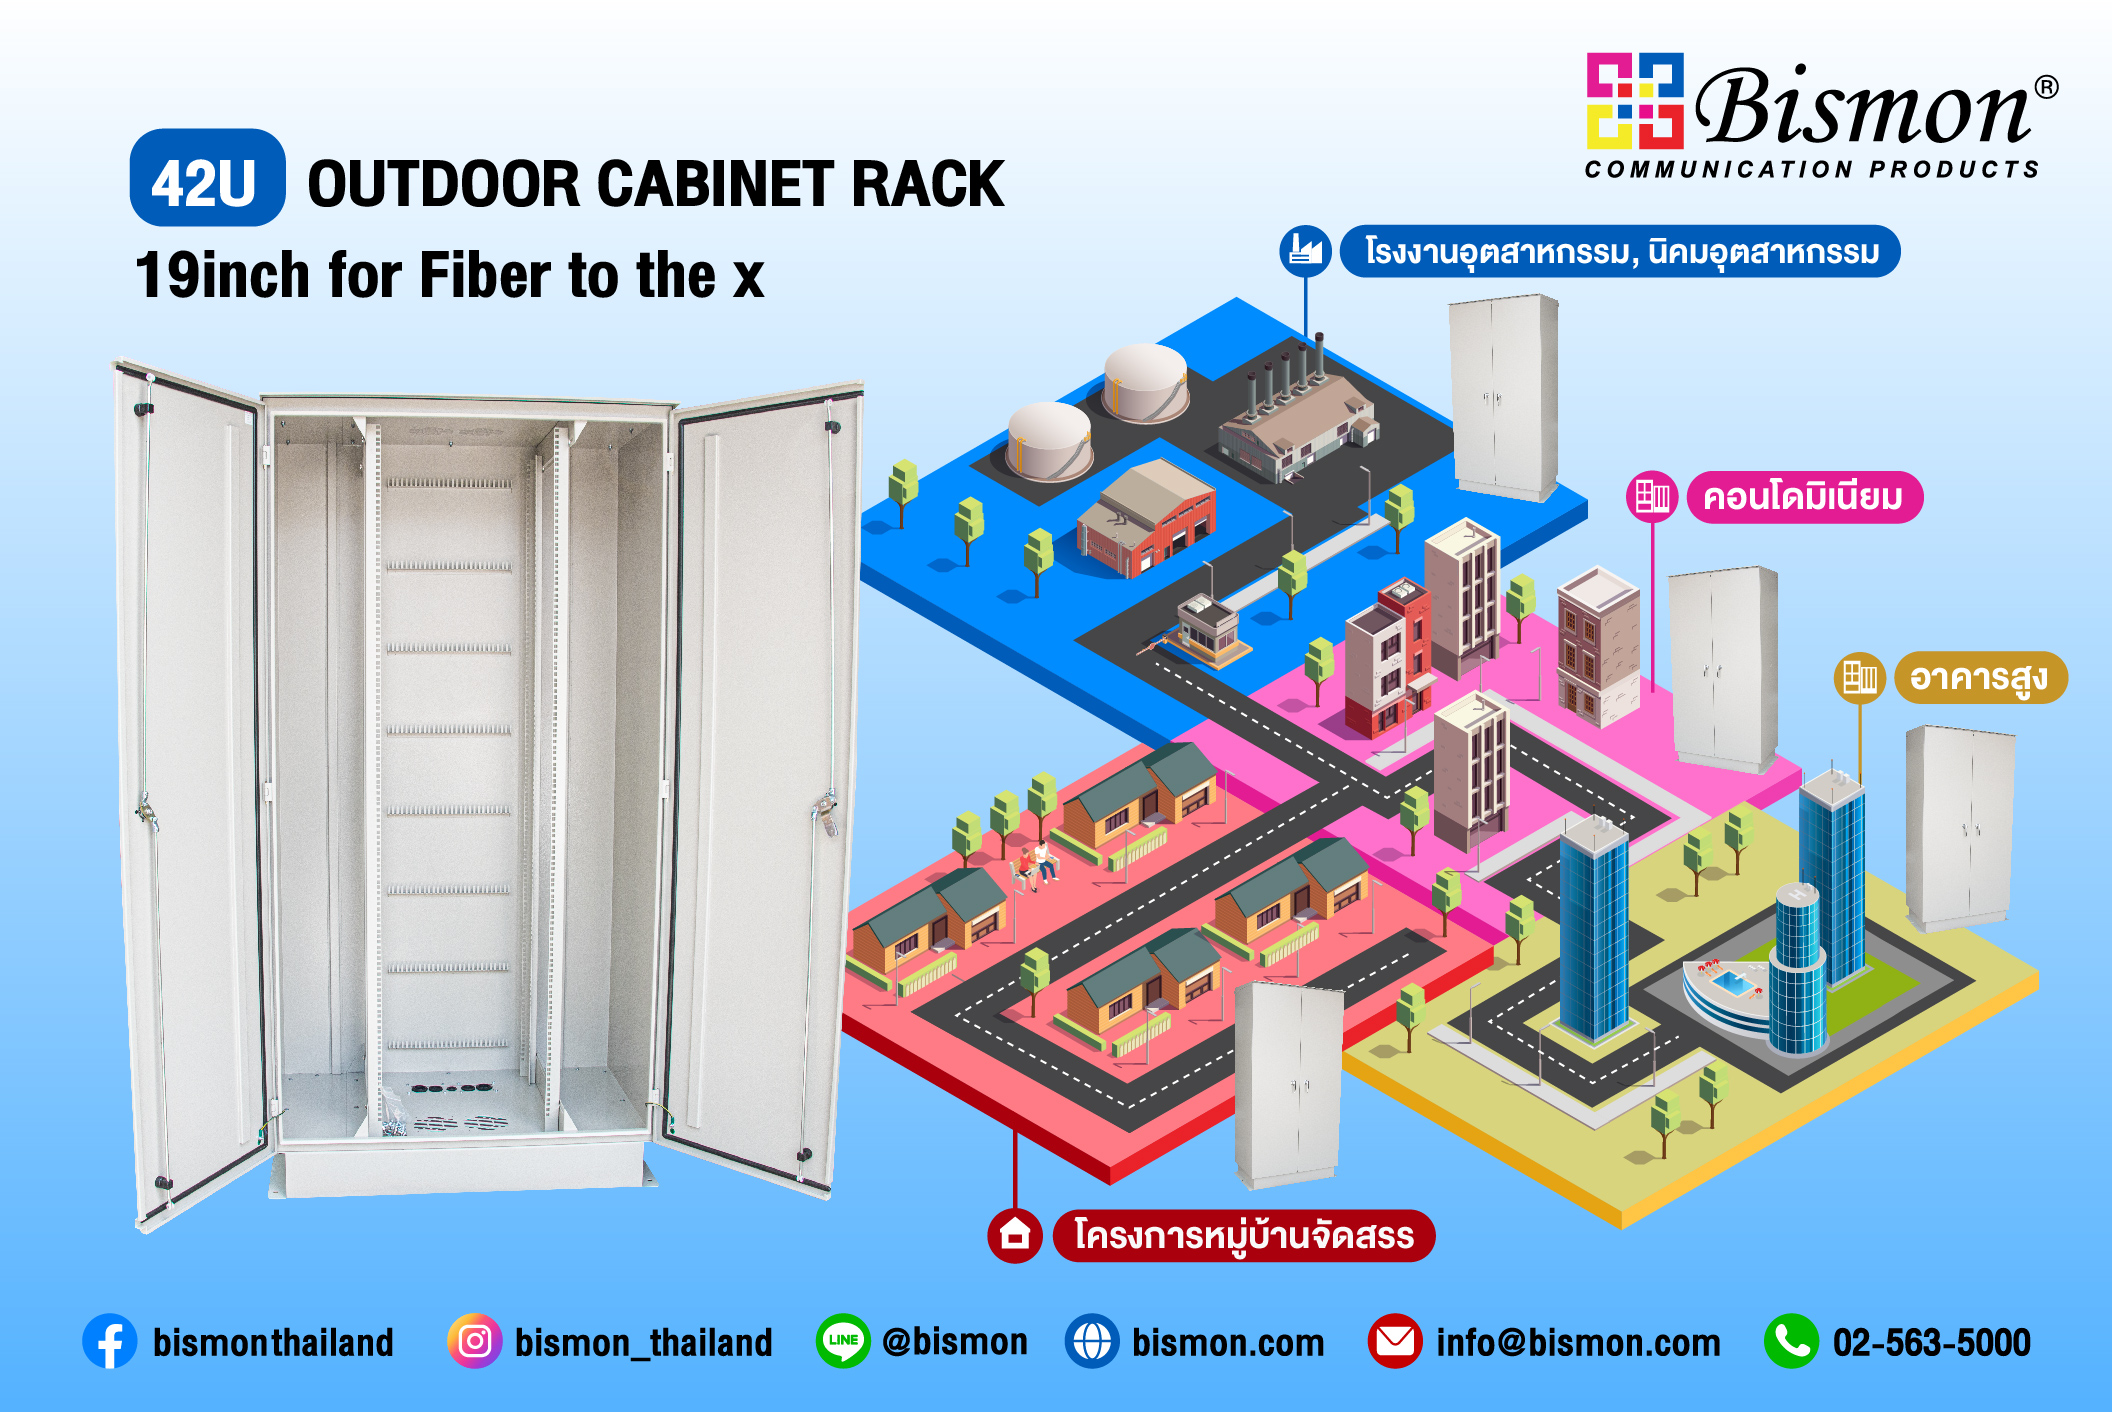 42U OUTDOOR CABINET RACK 19inch FOR FIBER TO THE X